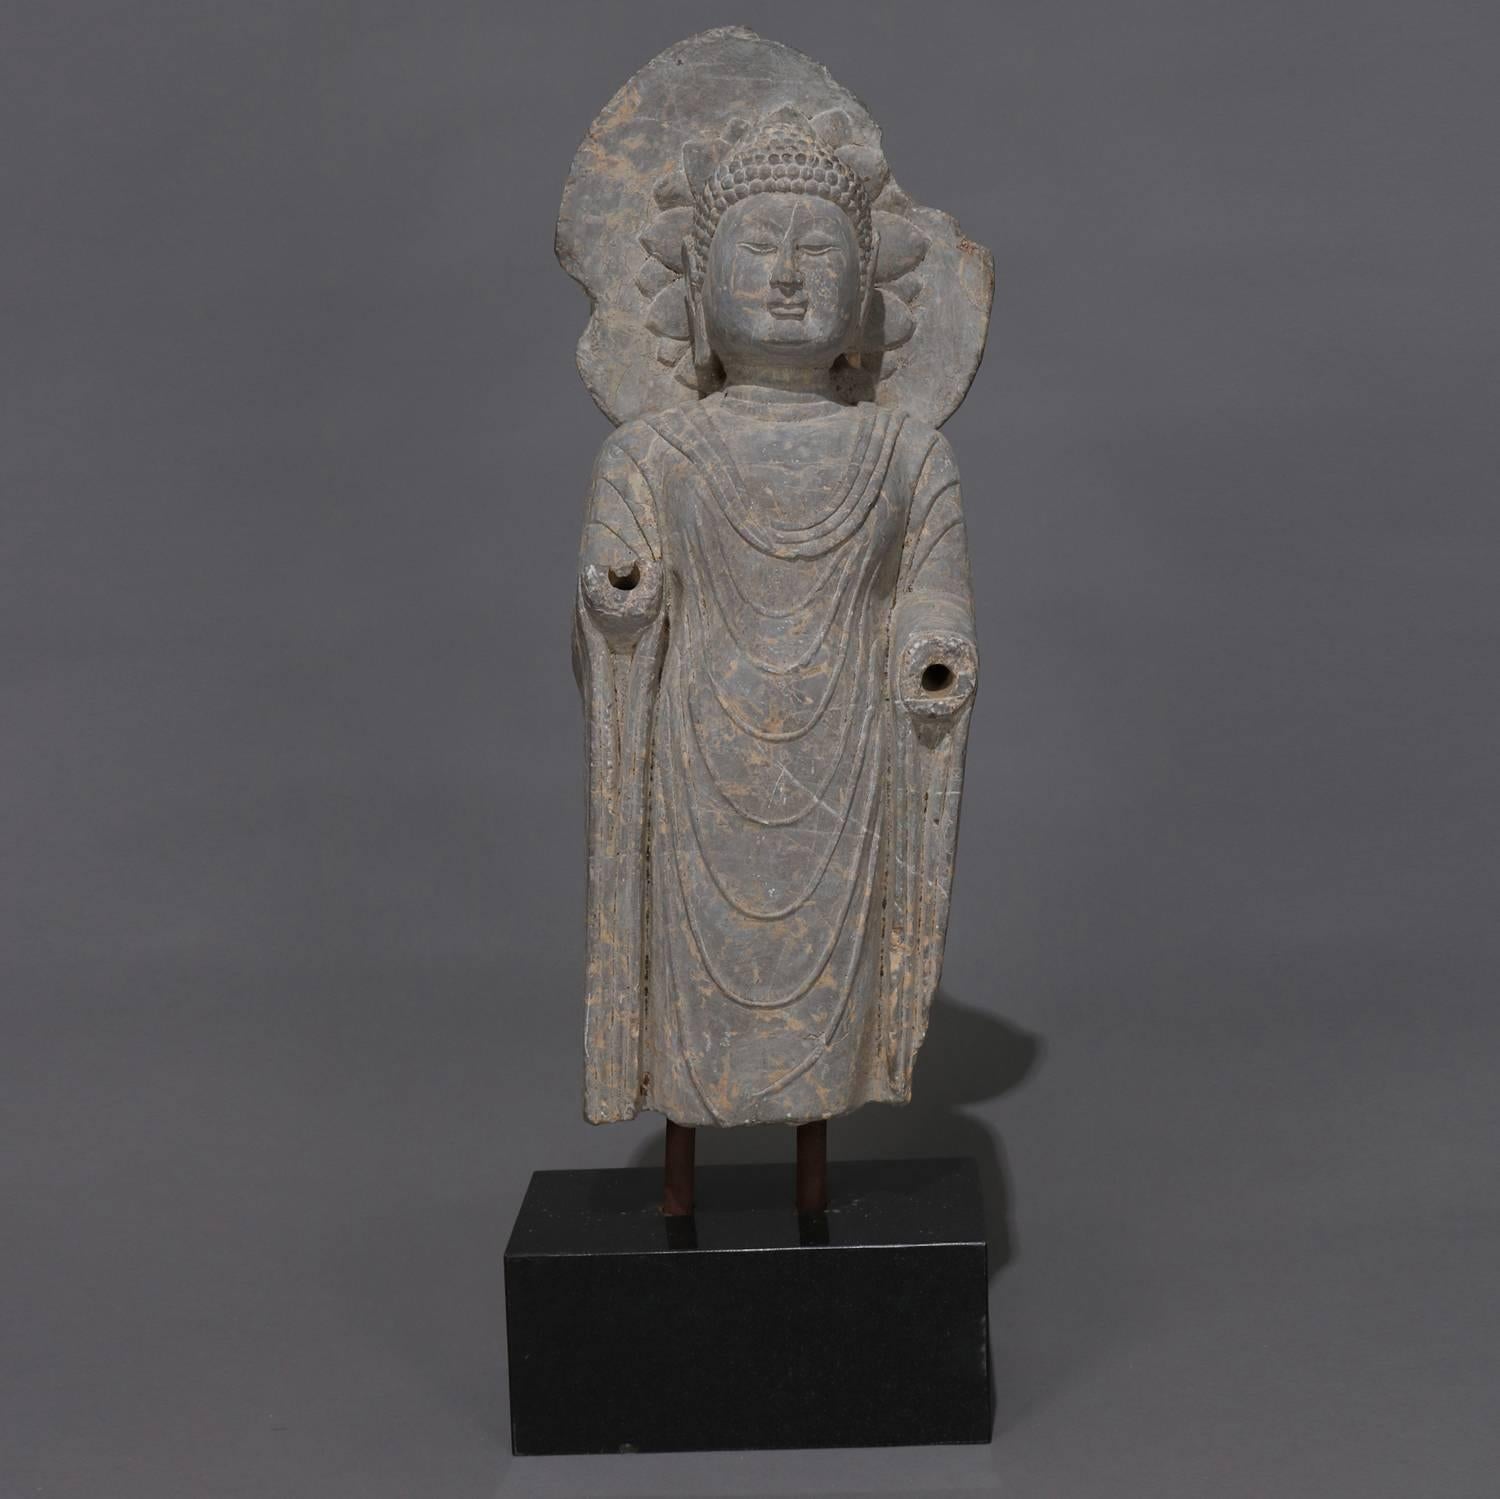 Large antique Tibetan carved stone religious sculpture of Buddha mounted on marble base, 20th century

Measures: 33